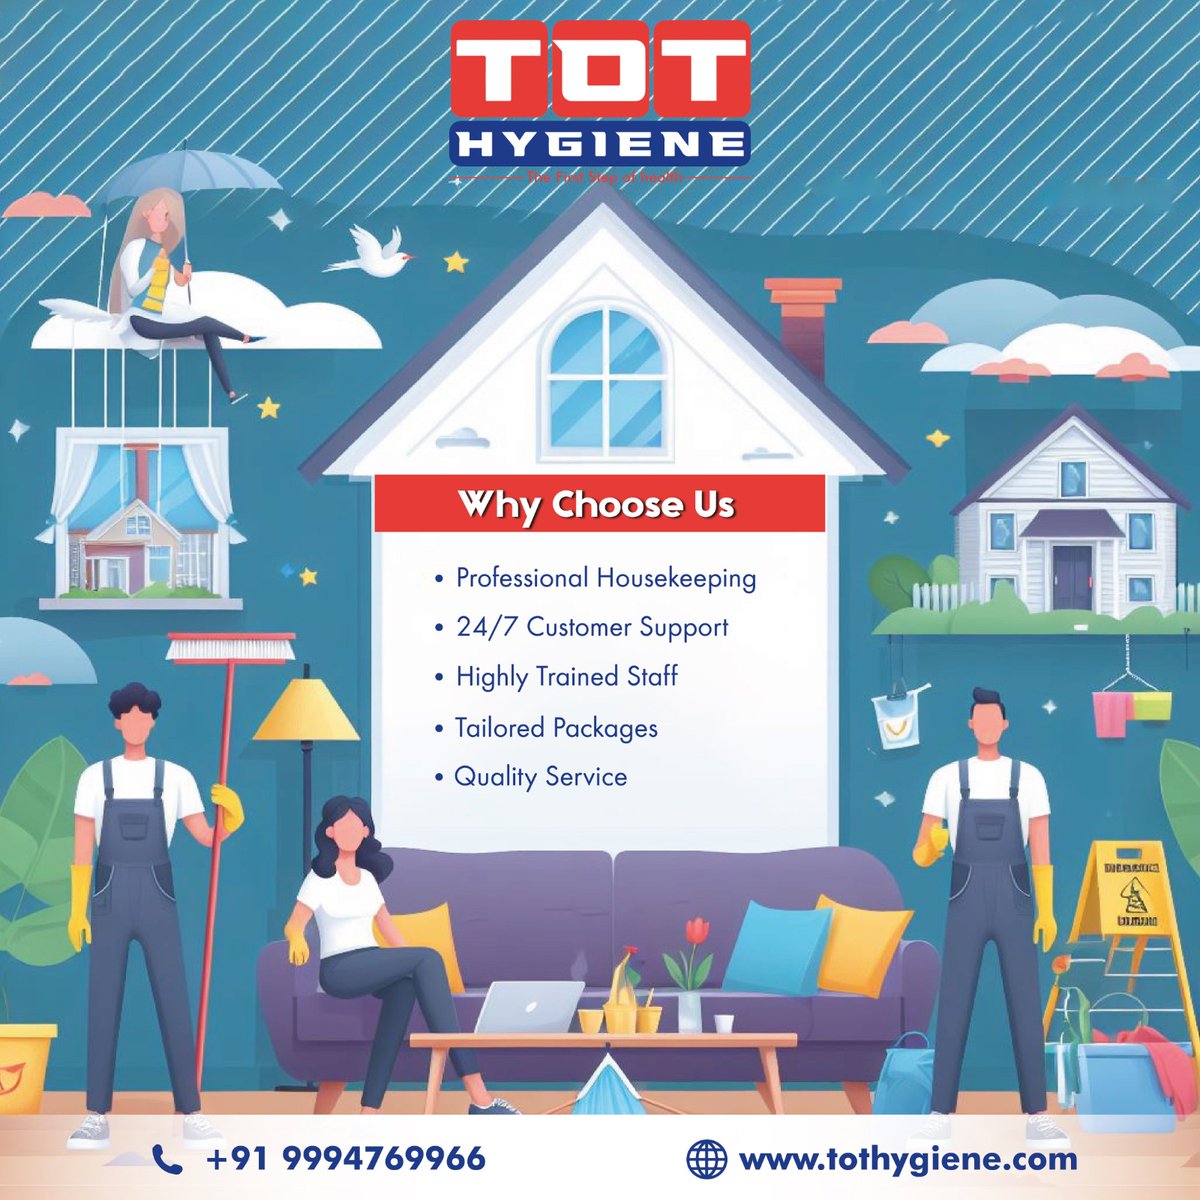 #Coimbatore #TOTHygiene #OneTimeCleaningServices #Cleaningservicenearme #HousekeepingService #BestFullHomeCleaningServices #BathroomCleaningServicesNearMe 
#ToiletCleaningServicesNearMe